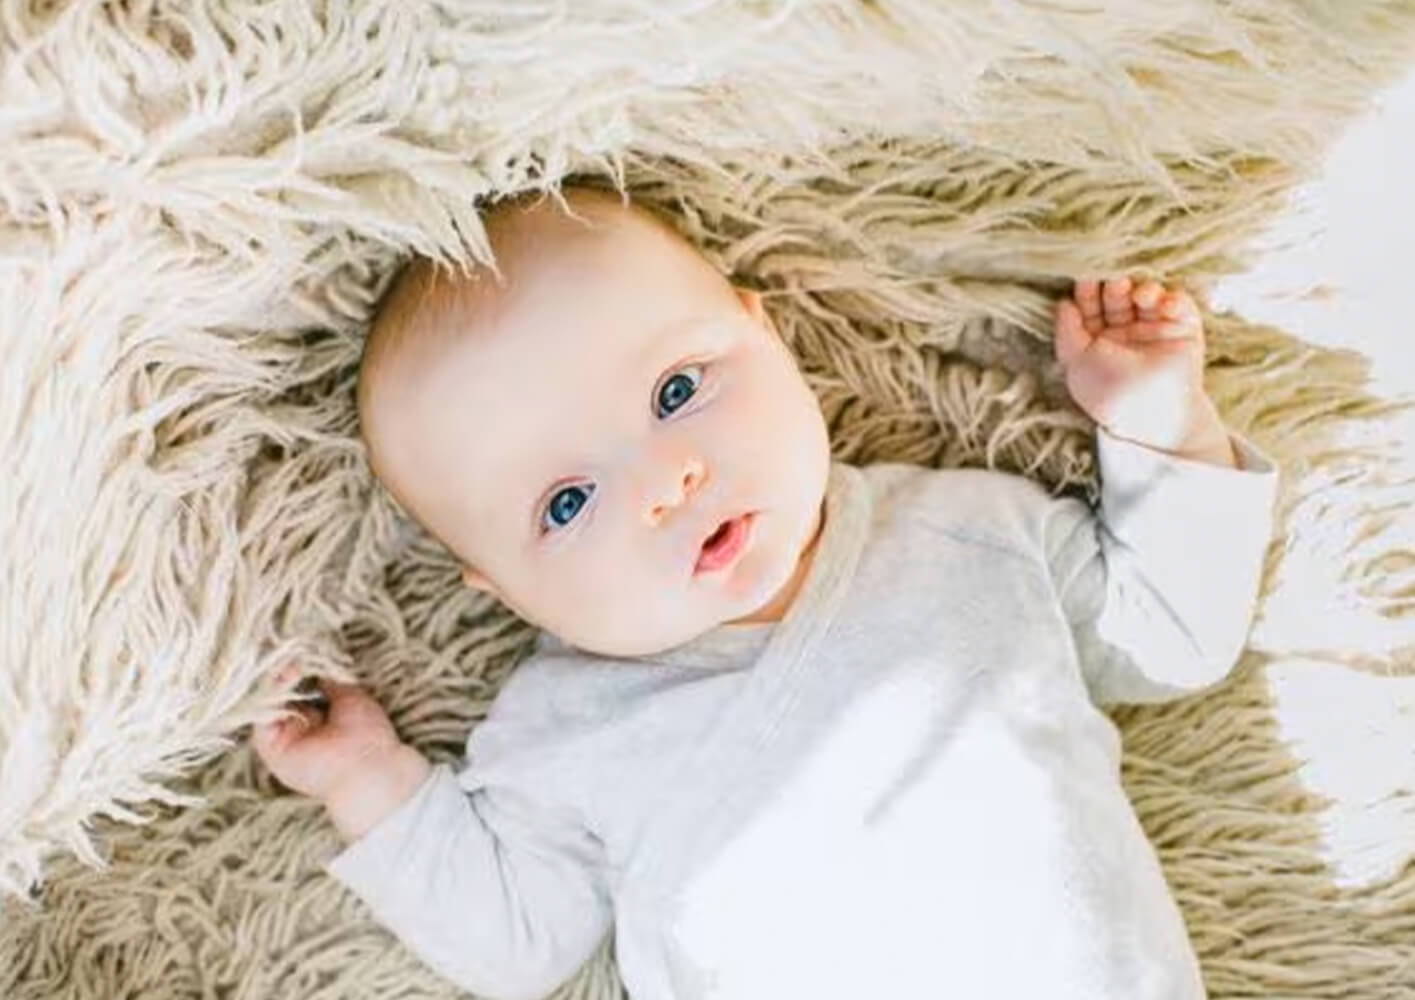 New: The Top 100 Baby Names Of The Year